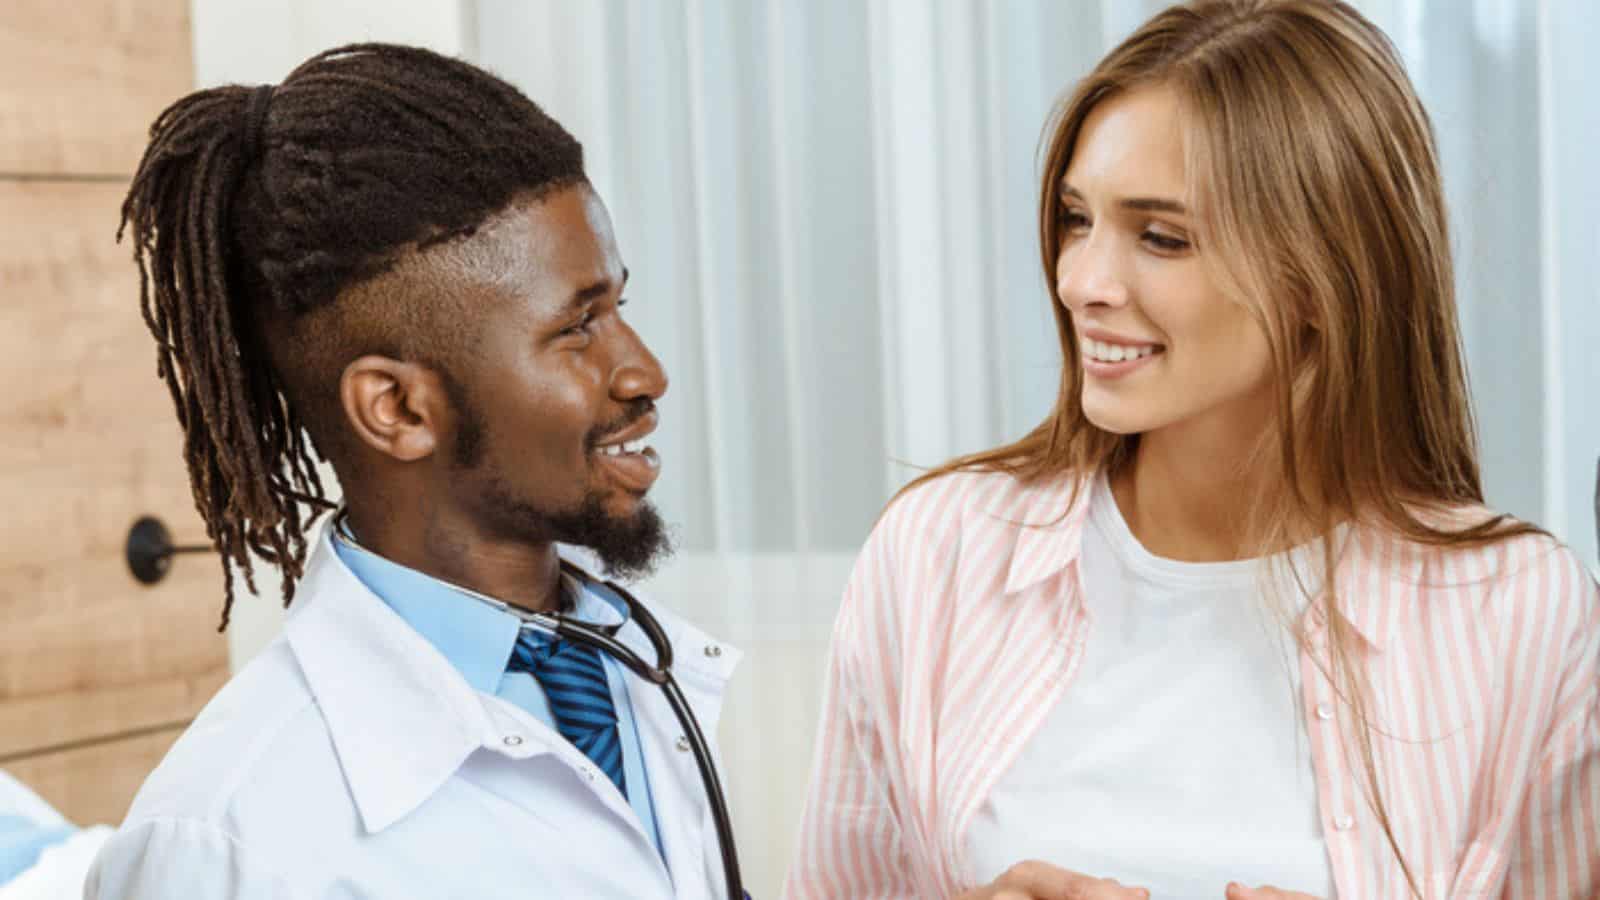 Young doctor talking to woman